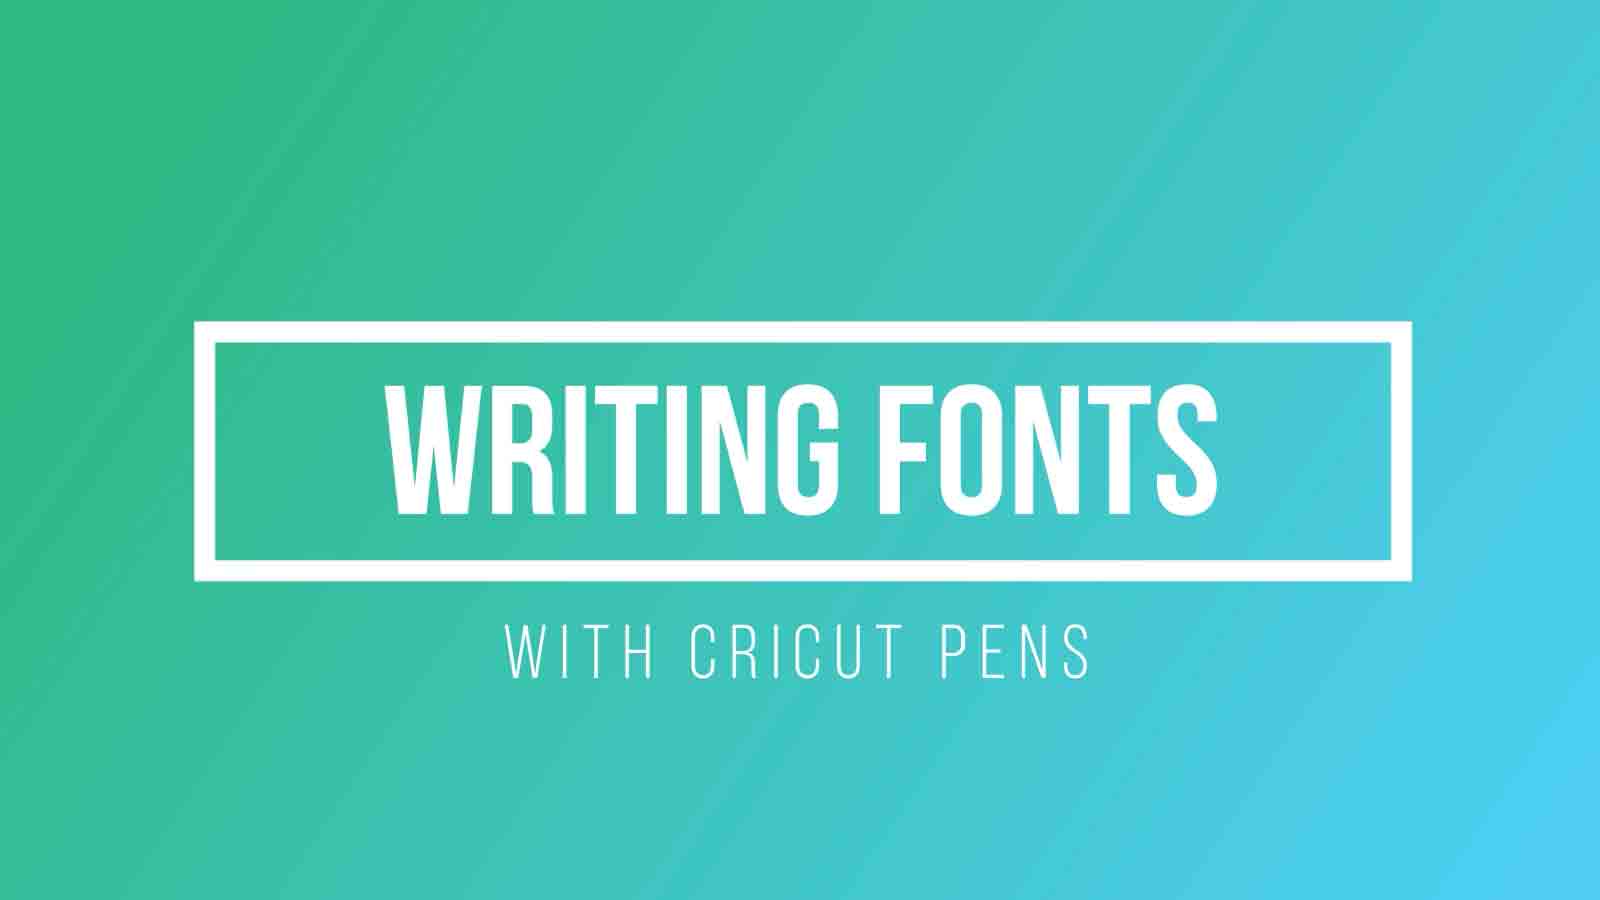 Writing Fonts with Cricut Pens